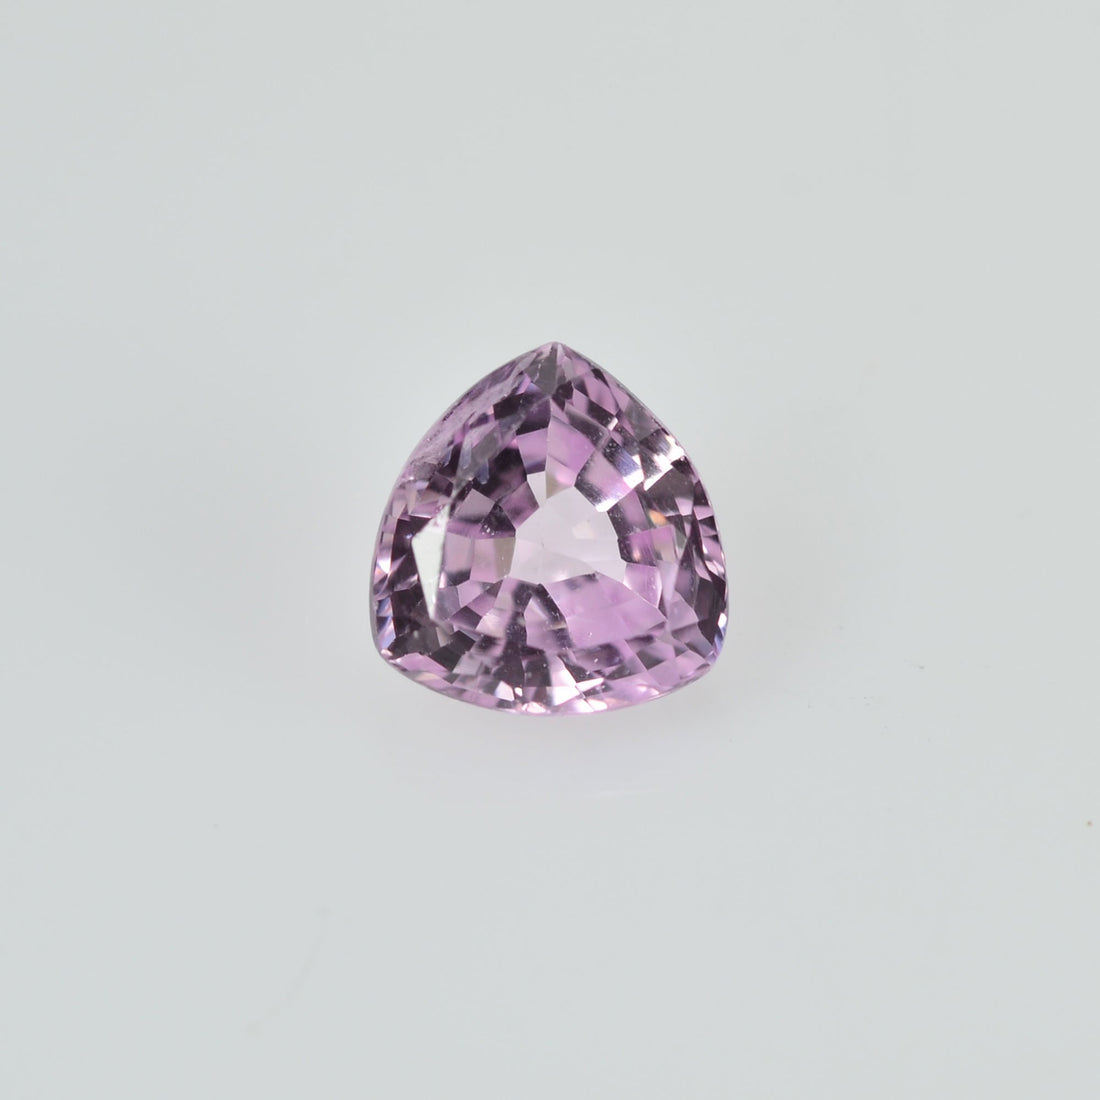 0.46 cts Natural Pink Sapphire Loose Gemstone Trillion Cut